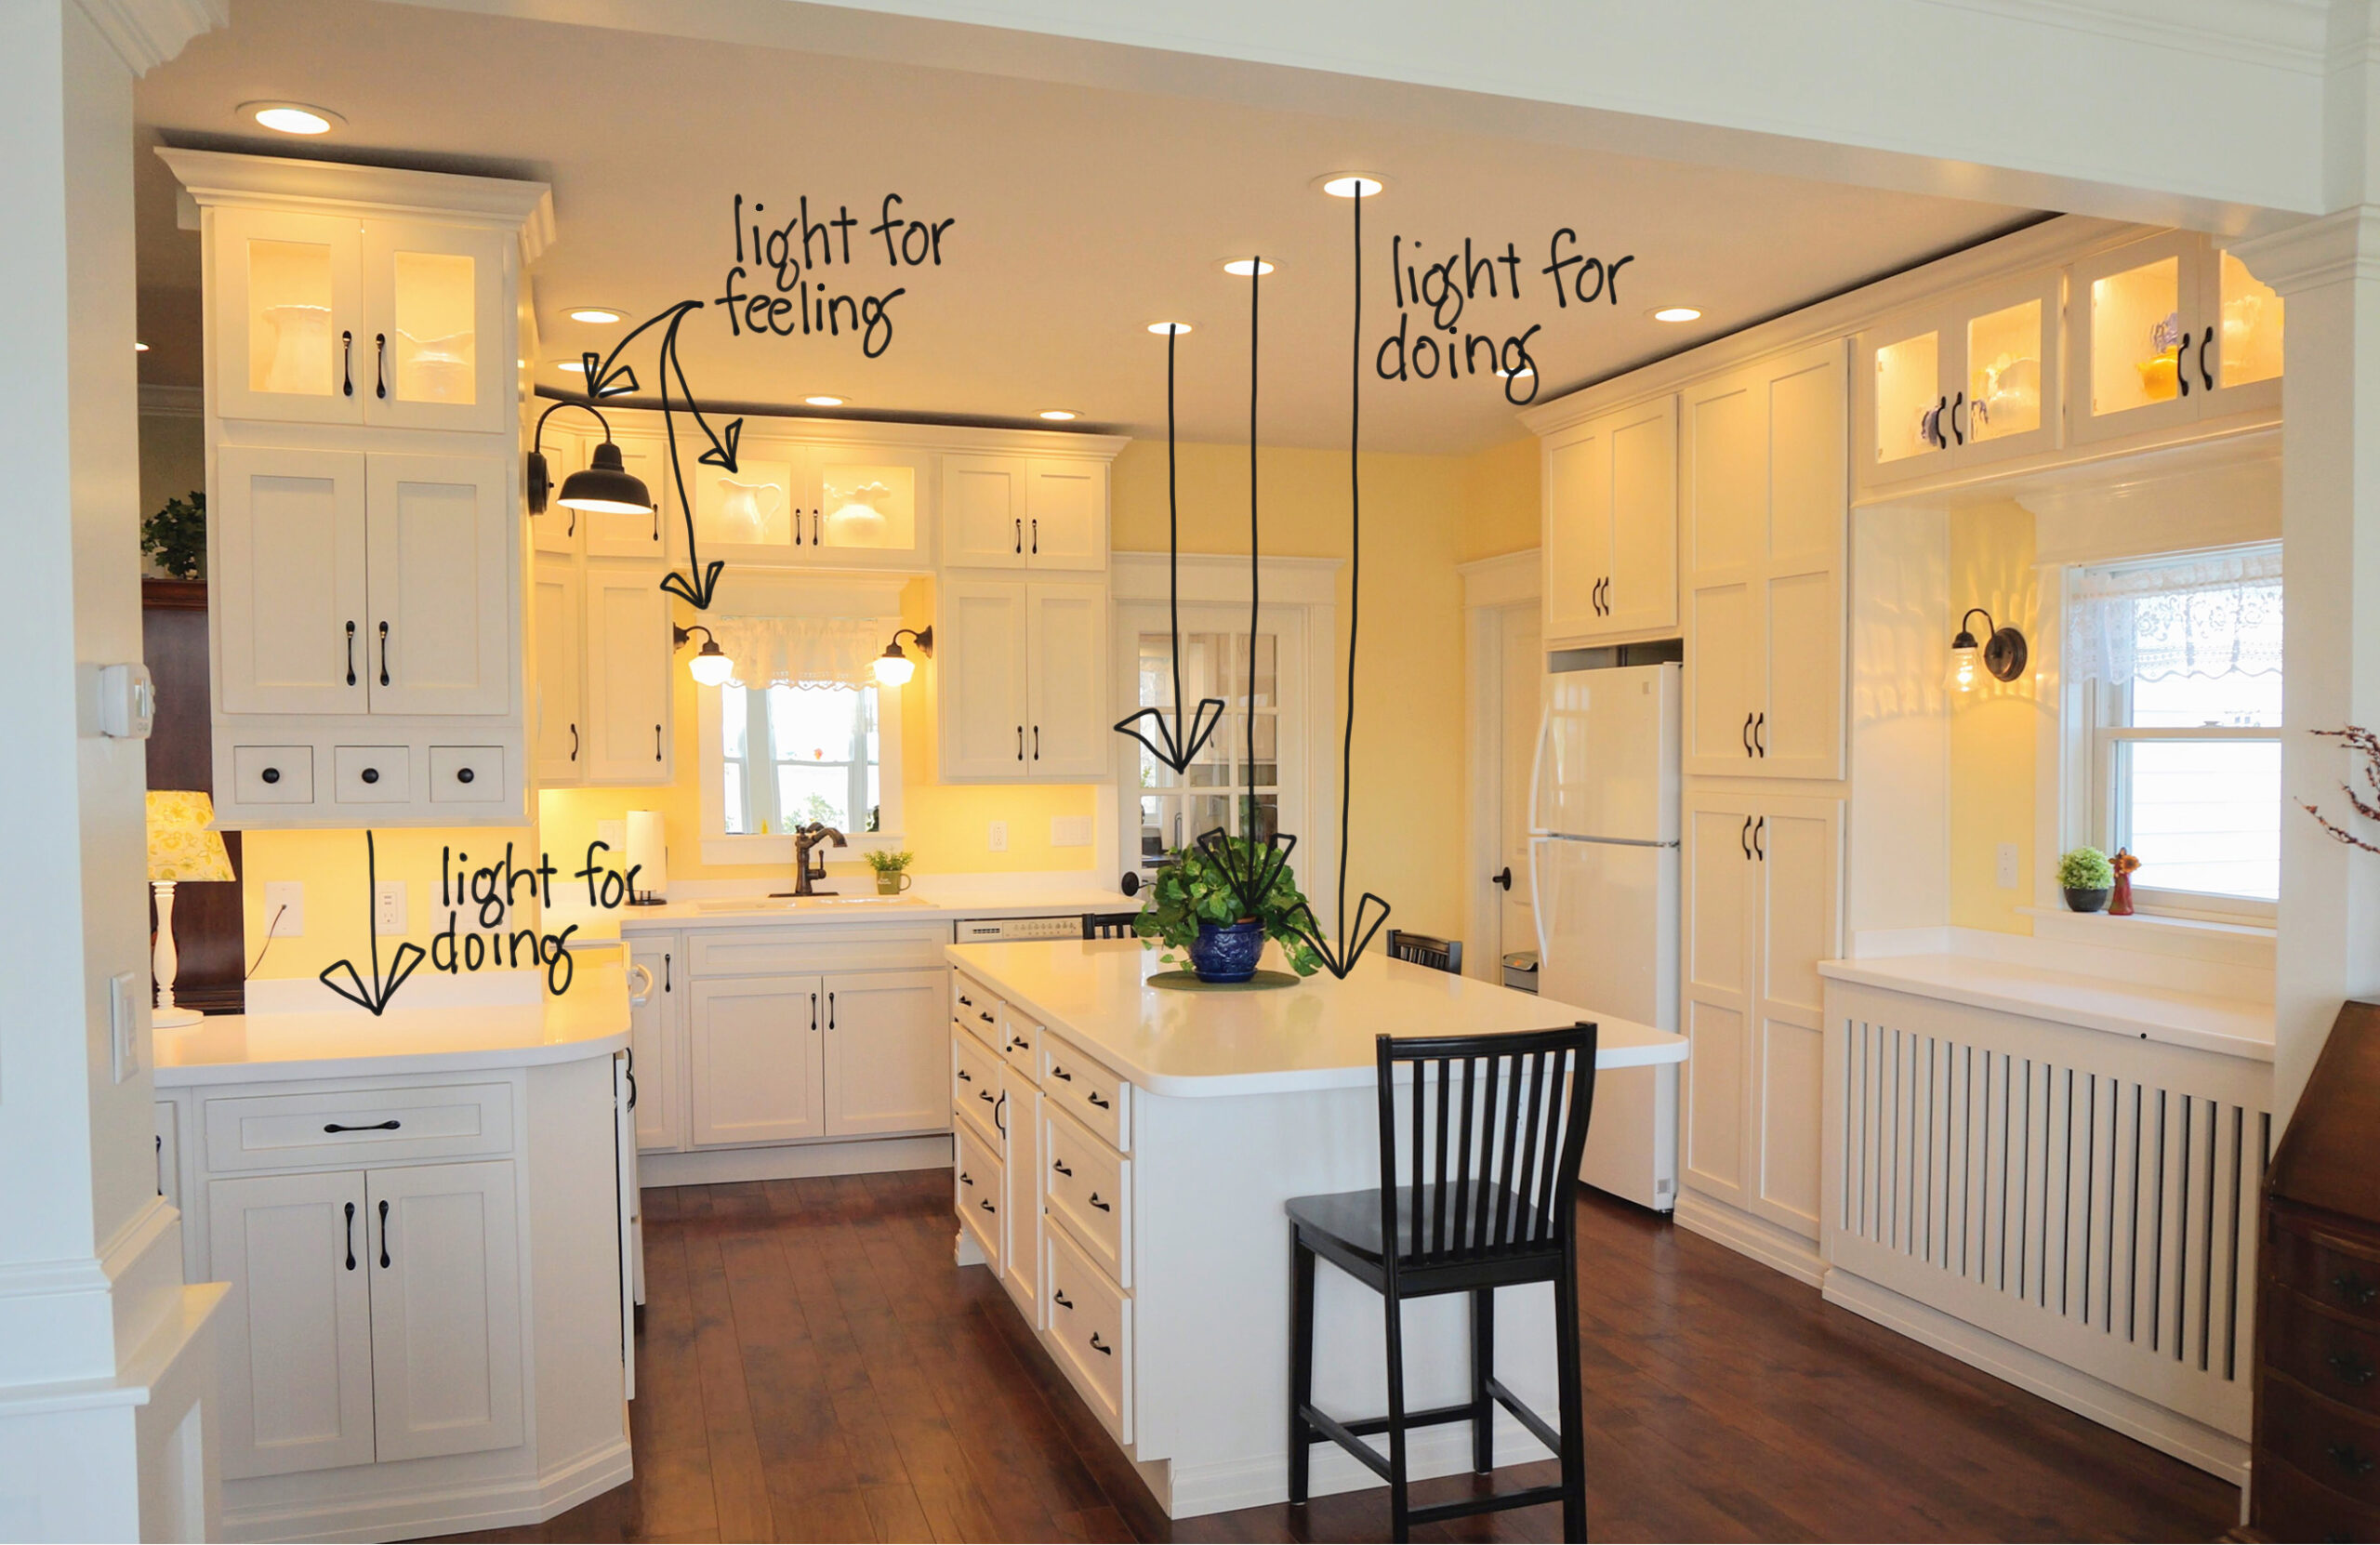 A photograph of a very white kitchen with white cabinetry, white walls, white appliances, and a white ceiling. Handdrawn arrows by some circle lights in the ceiling indicate "light for feeling" and "light for doing"